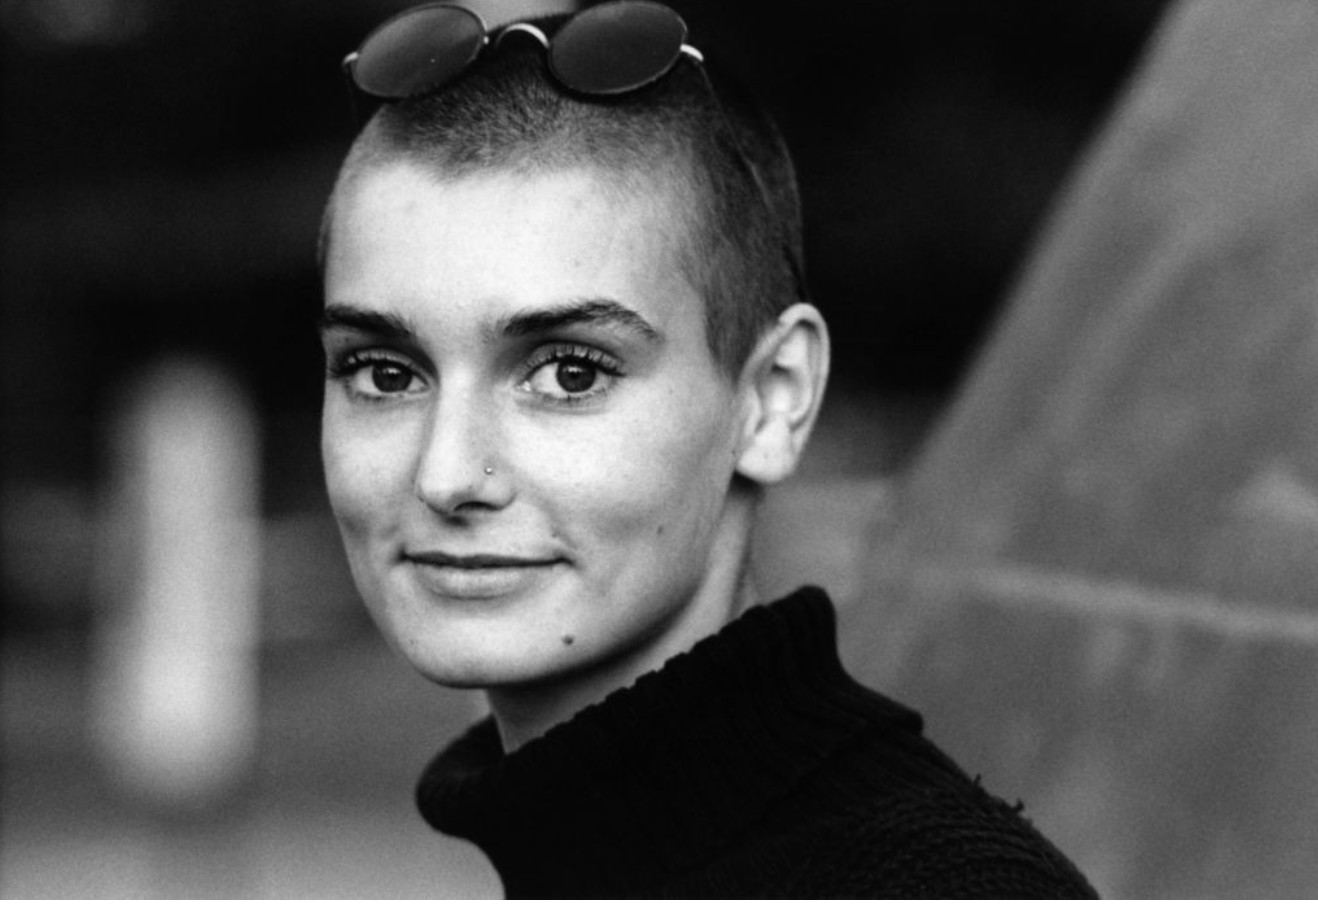 Sinéad O’Connor: Practice Being Lonely